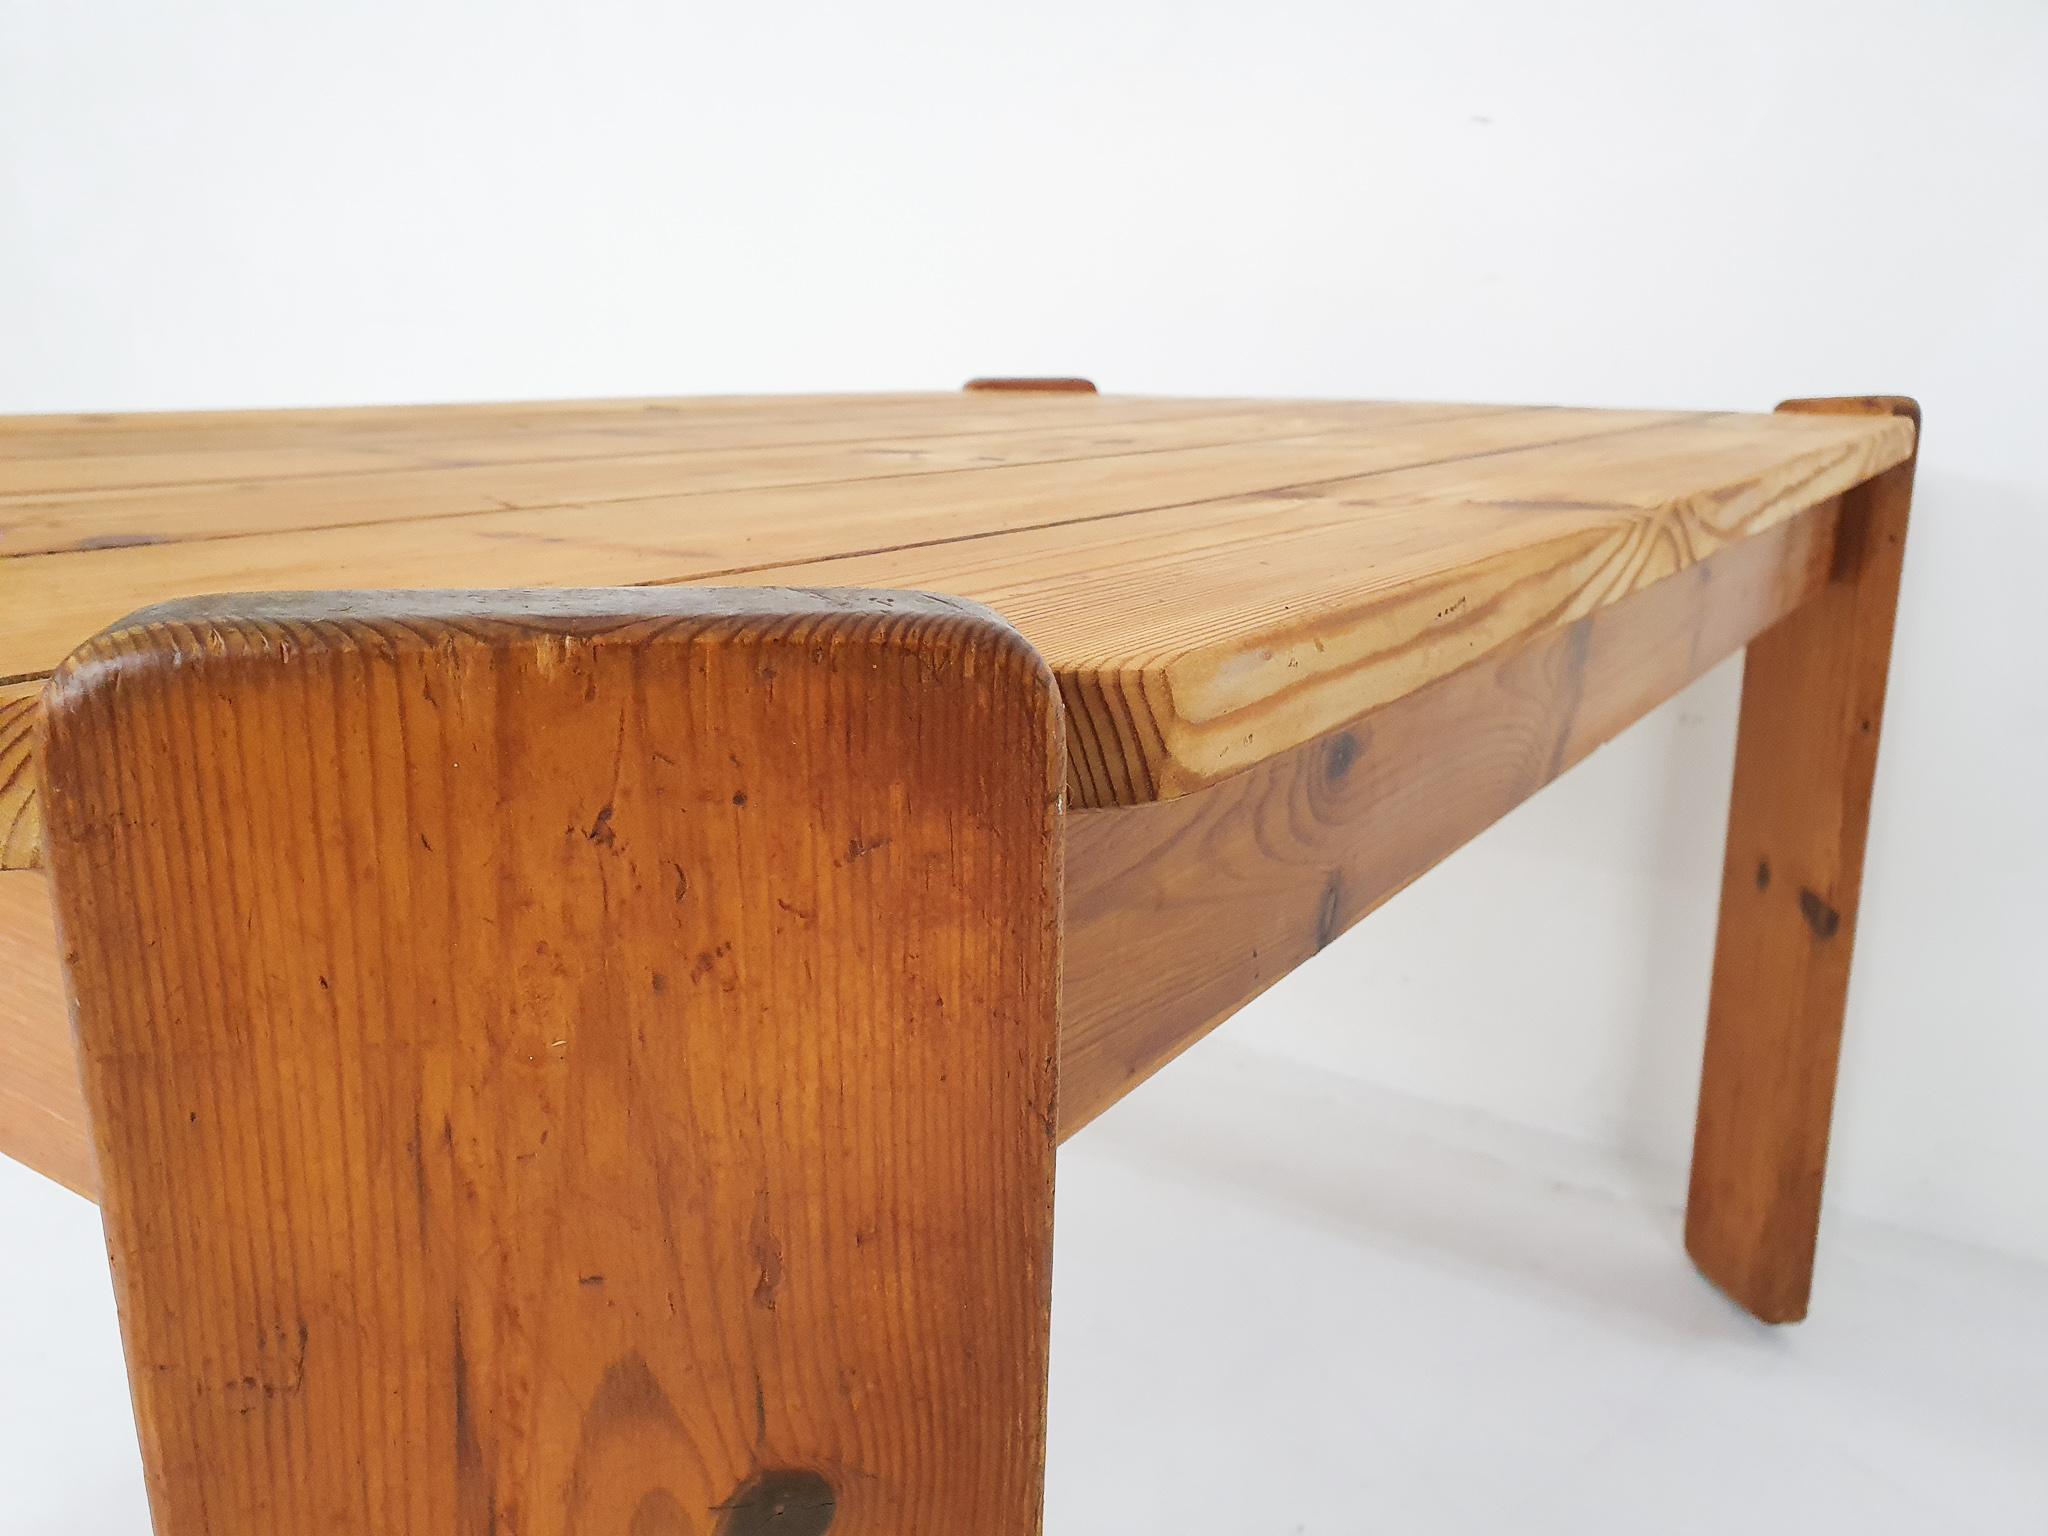 Pinewood dining table attrb. to Ate van Apeldoorn, The Netherlands 1970's For Sale 3